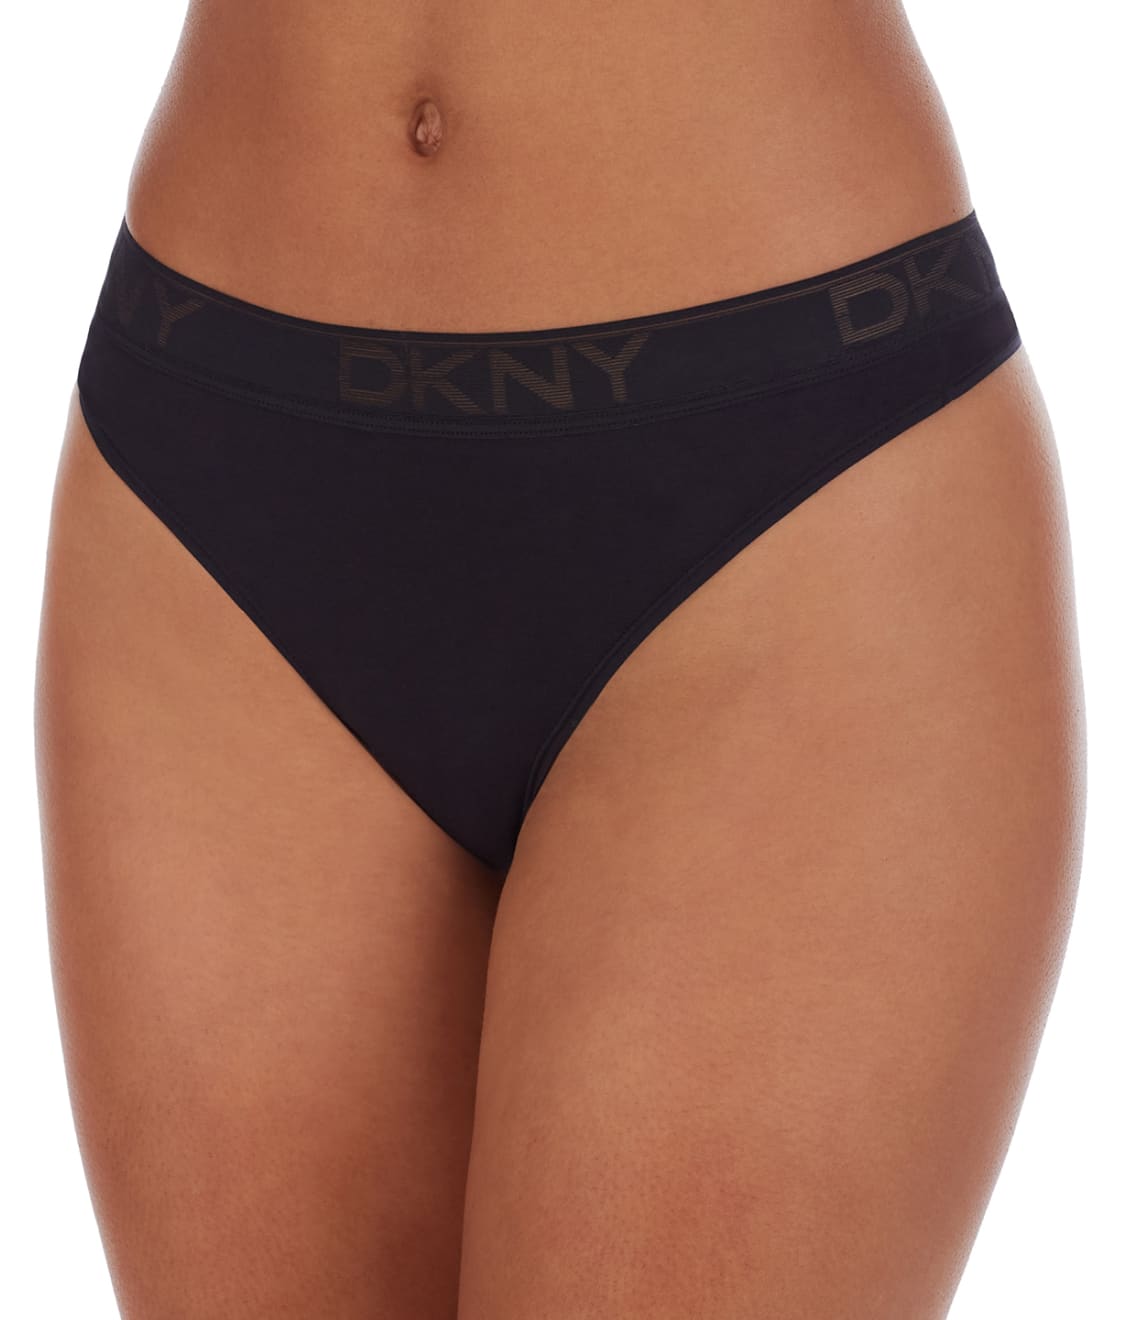 DKNY: Cotton Table Tops Thong DK8821